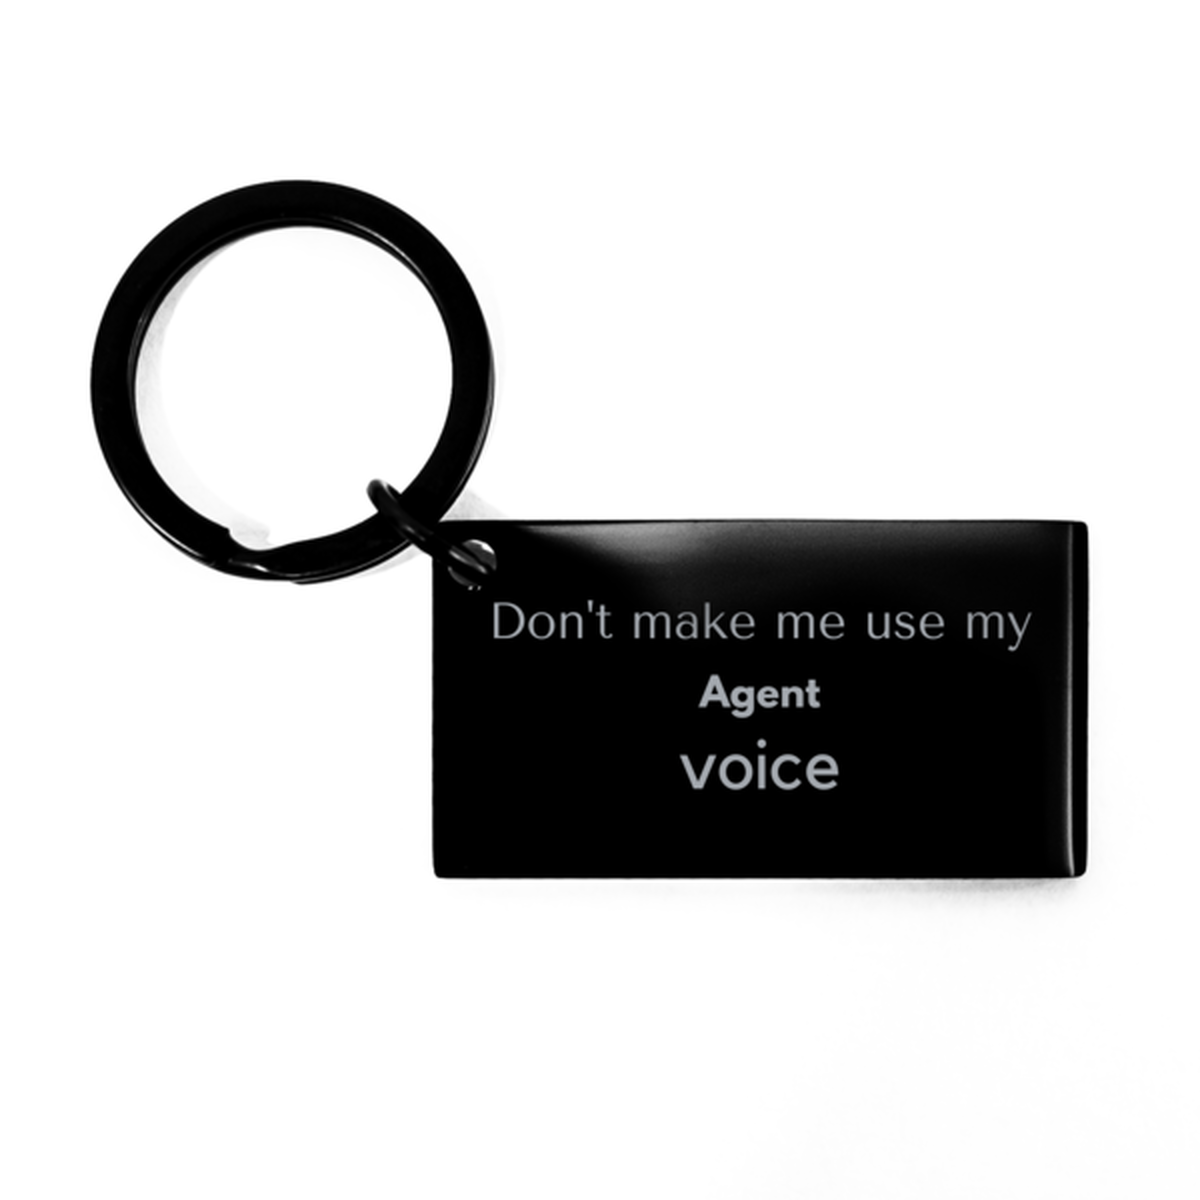 Don't make me use my Agent voice, Sarcasm Agent Gifts, Christmas Agent Keychain Birthday Unique Gifts For Agent Coworkers, Men, Women, Colleague, Friends